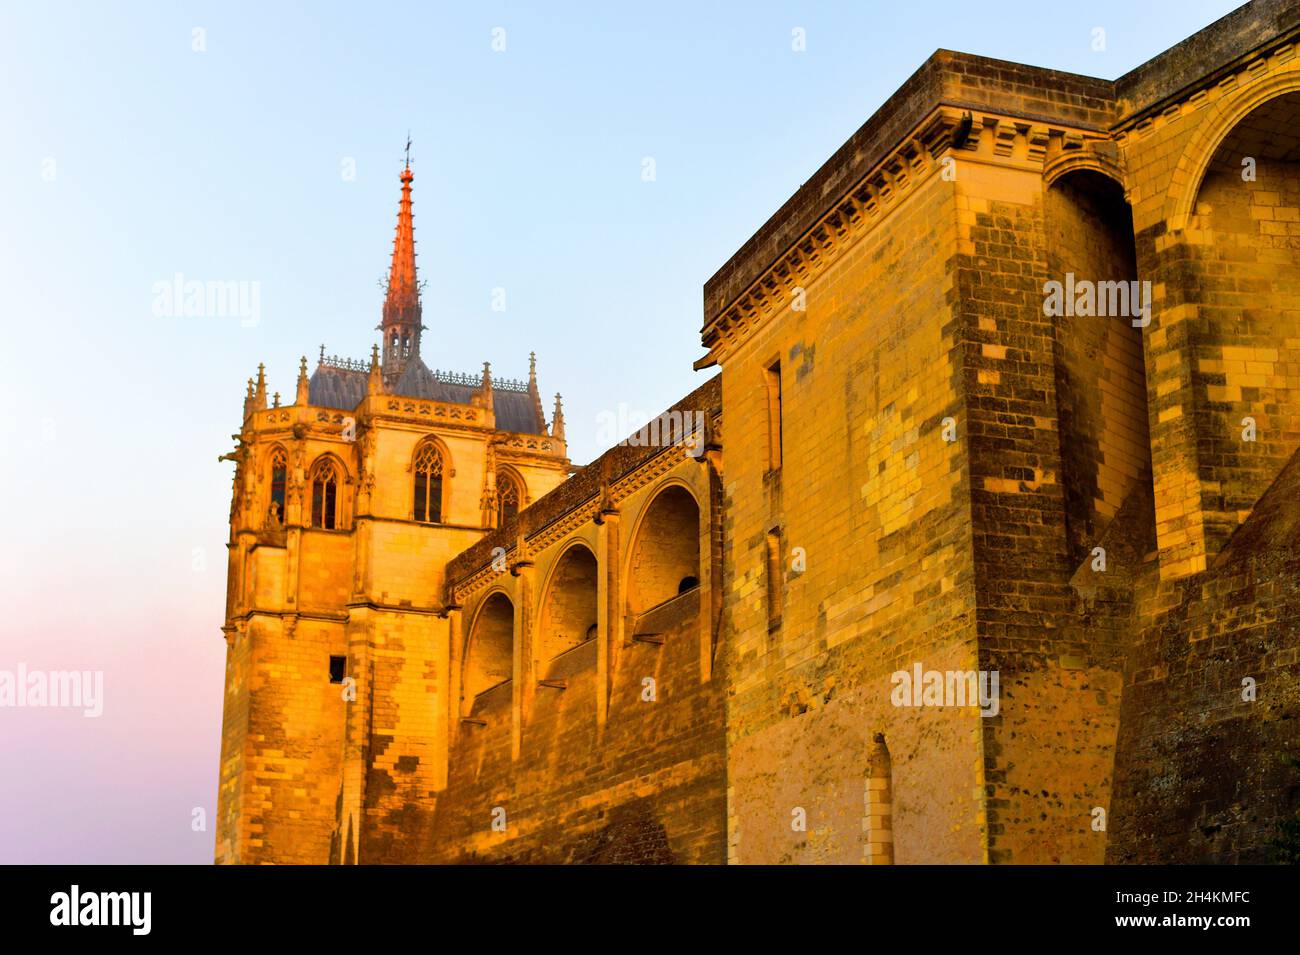 Amboise n the Loire Valley, France, Europe. Stock Photo